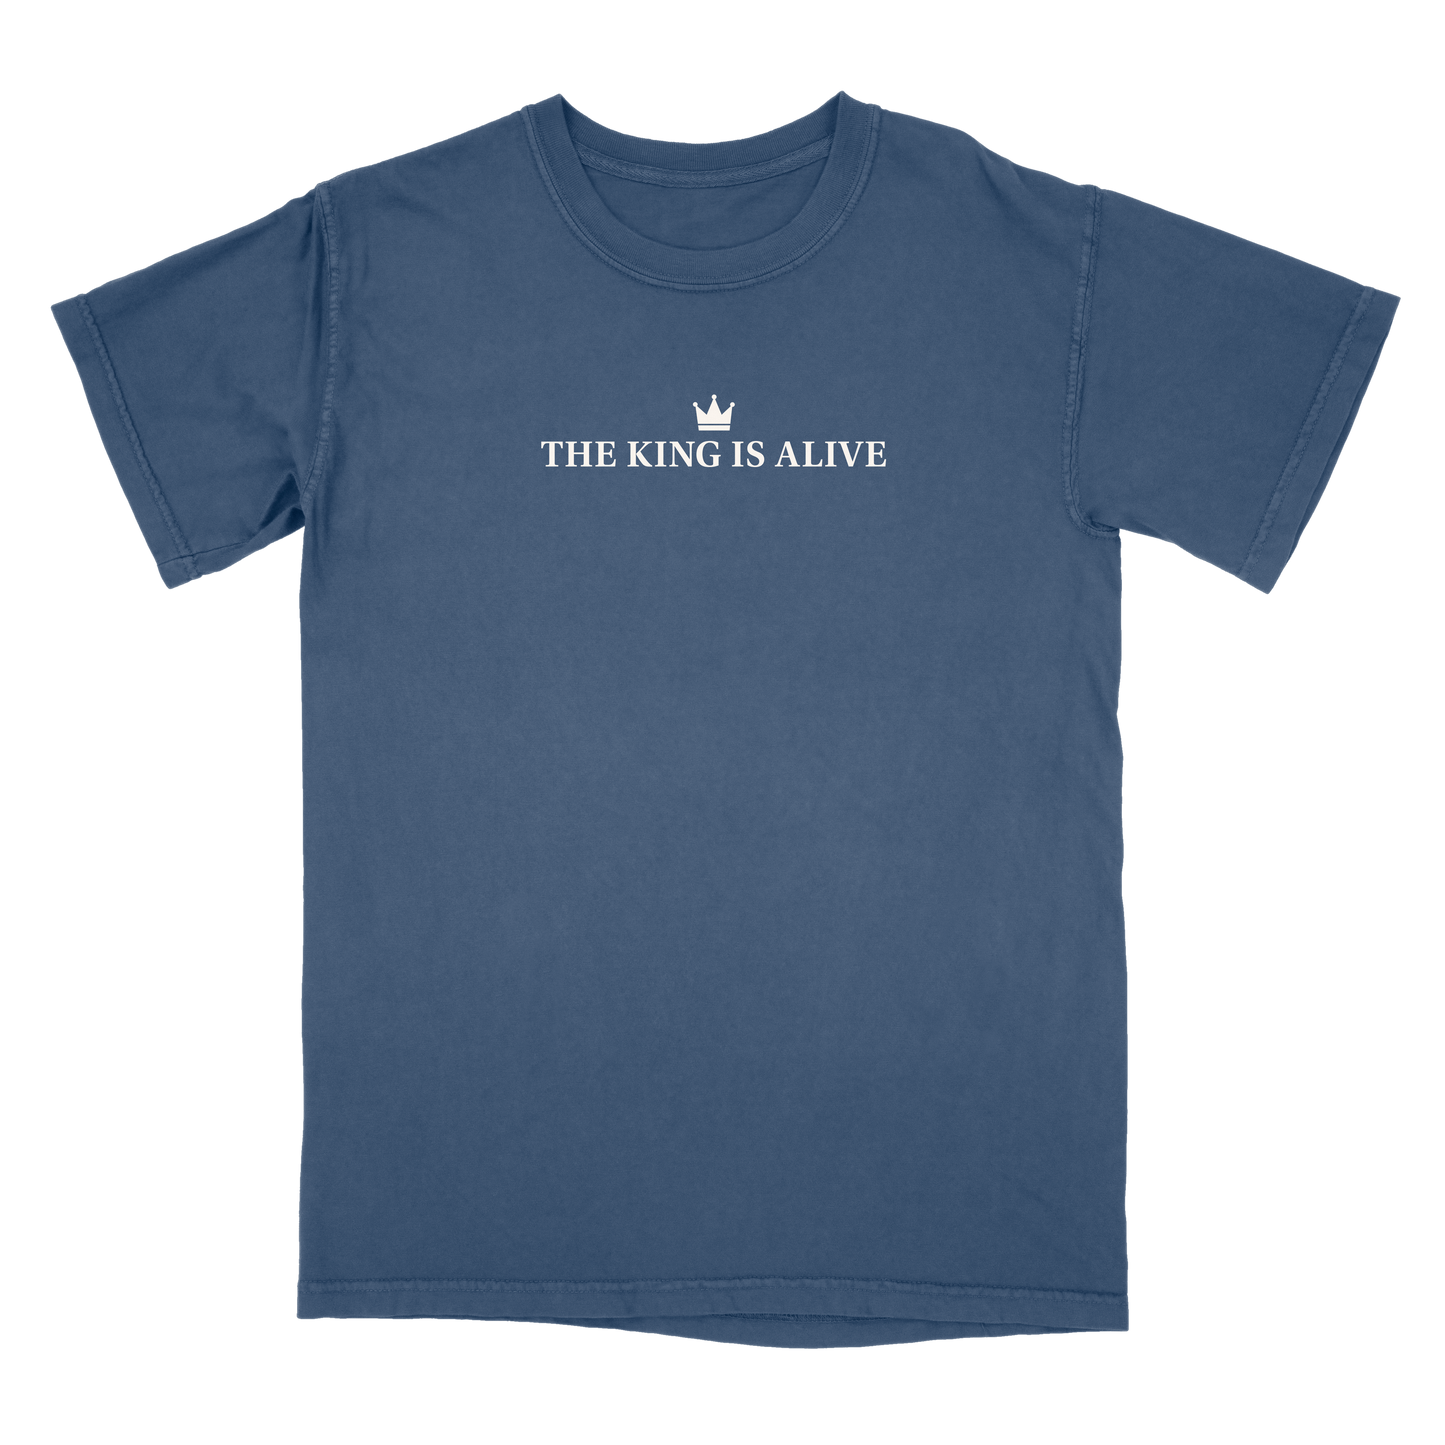 The King is Alive         ( t-shirt )